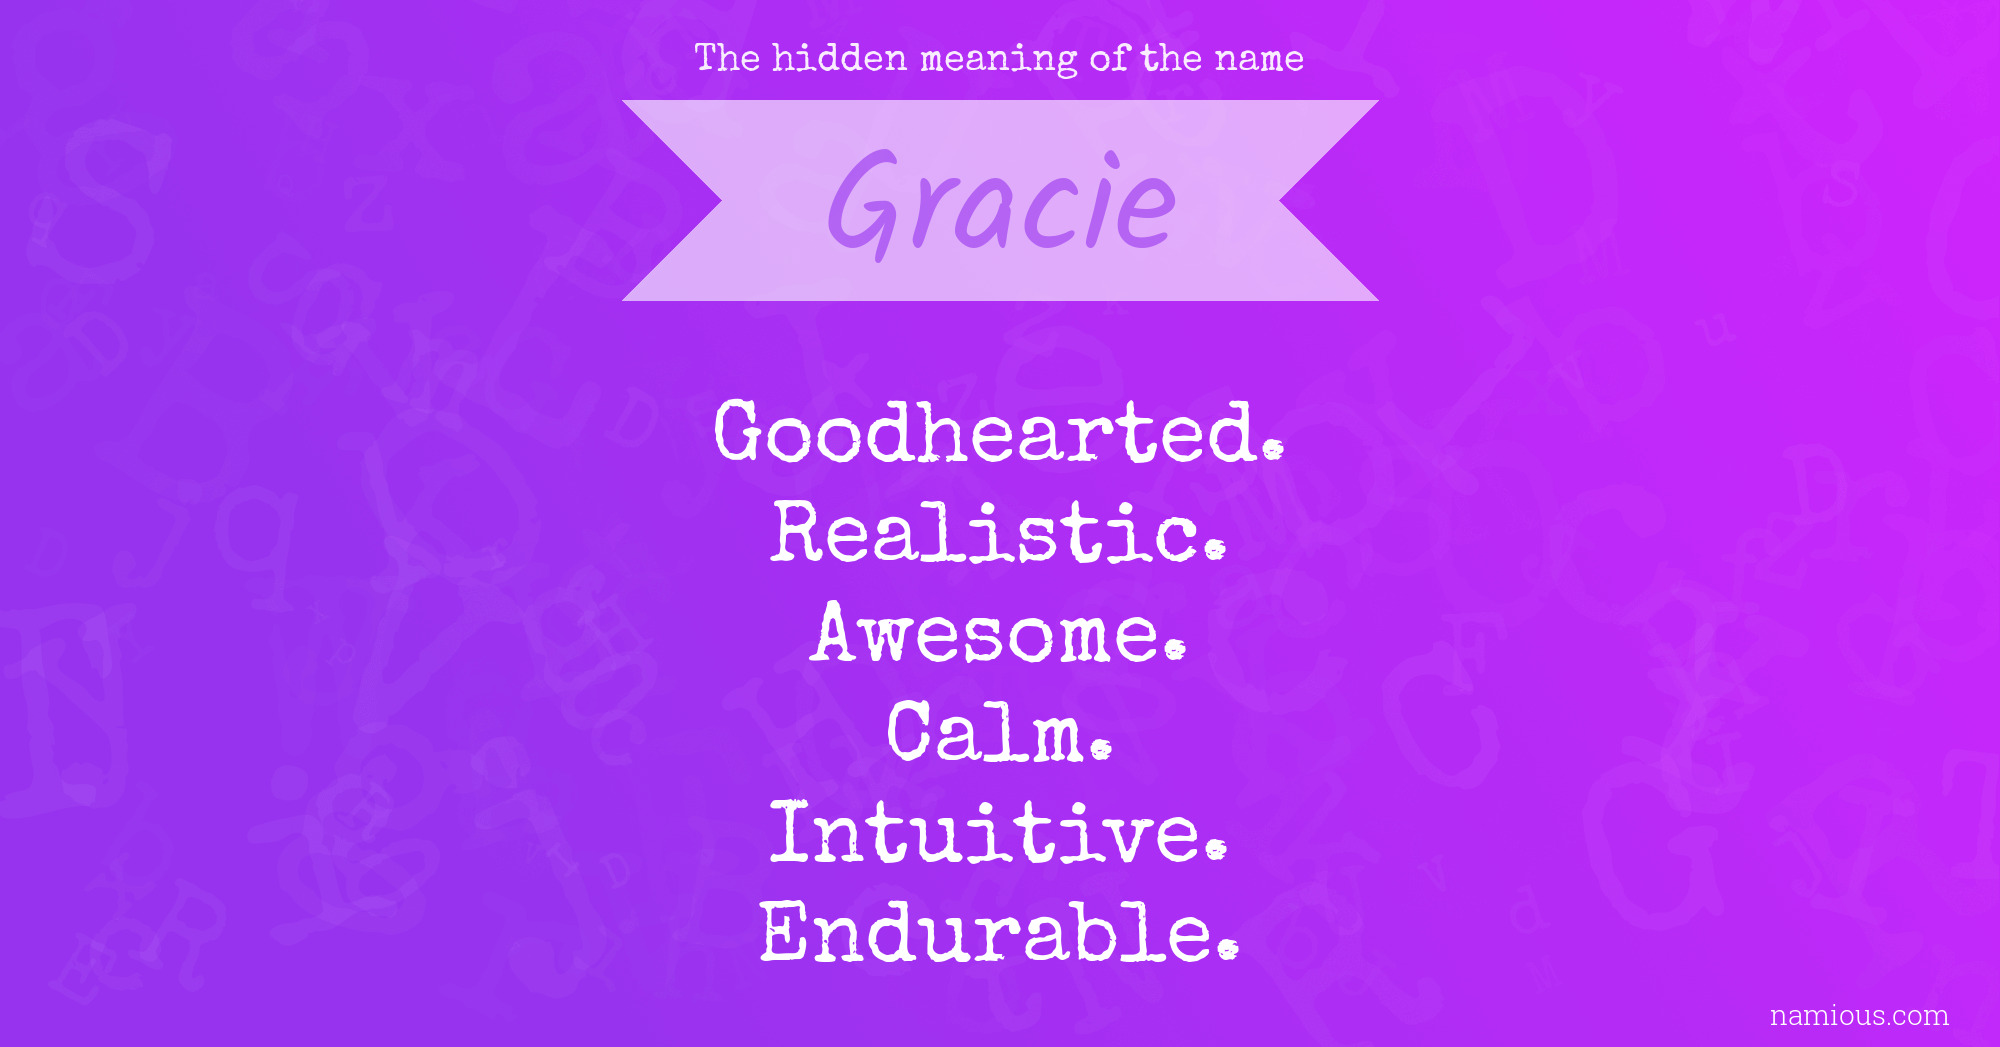 The hidden meaning of the name Gracie